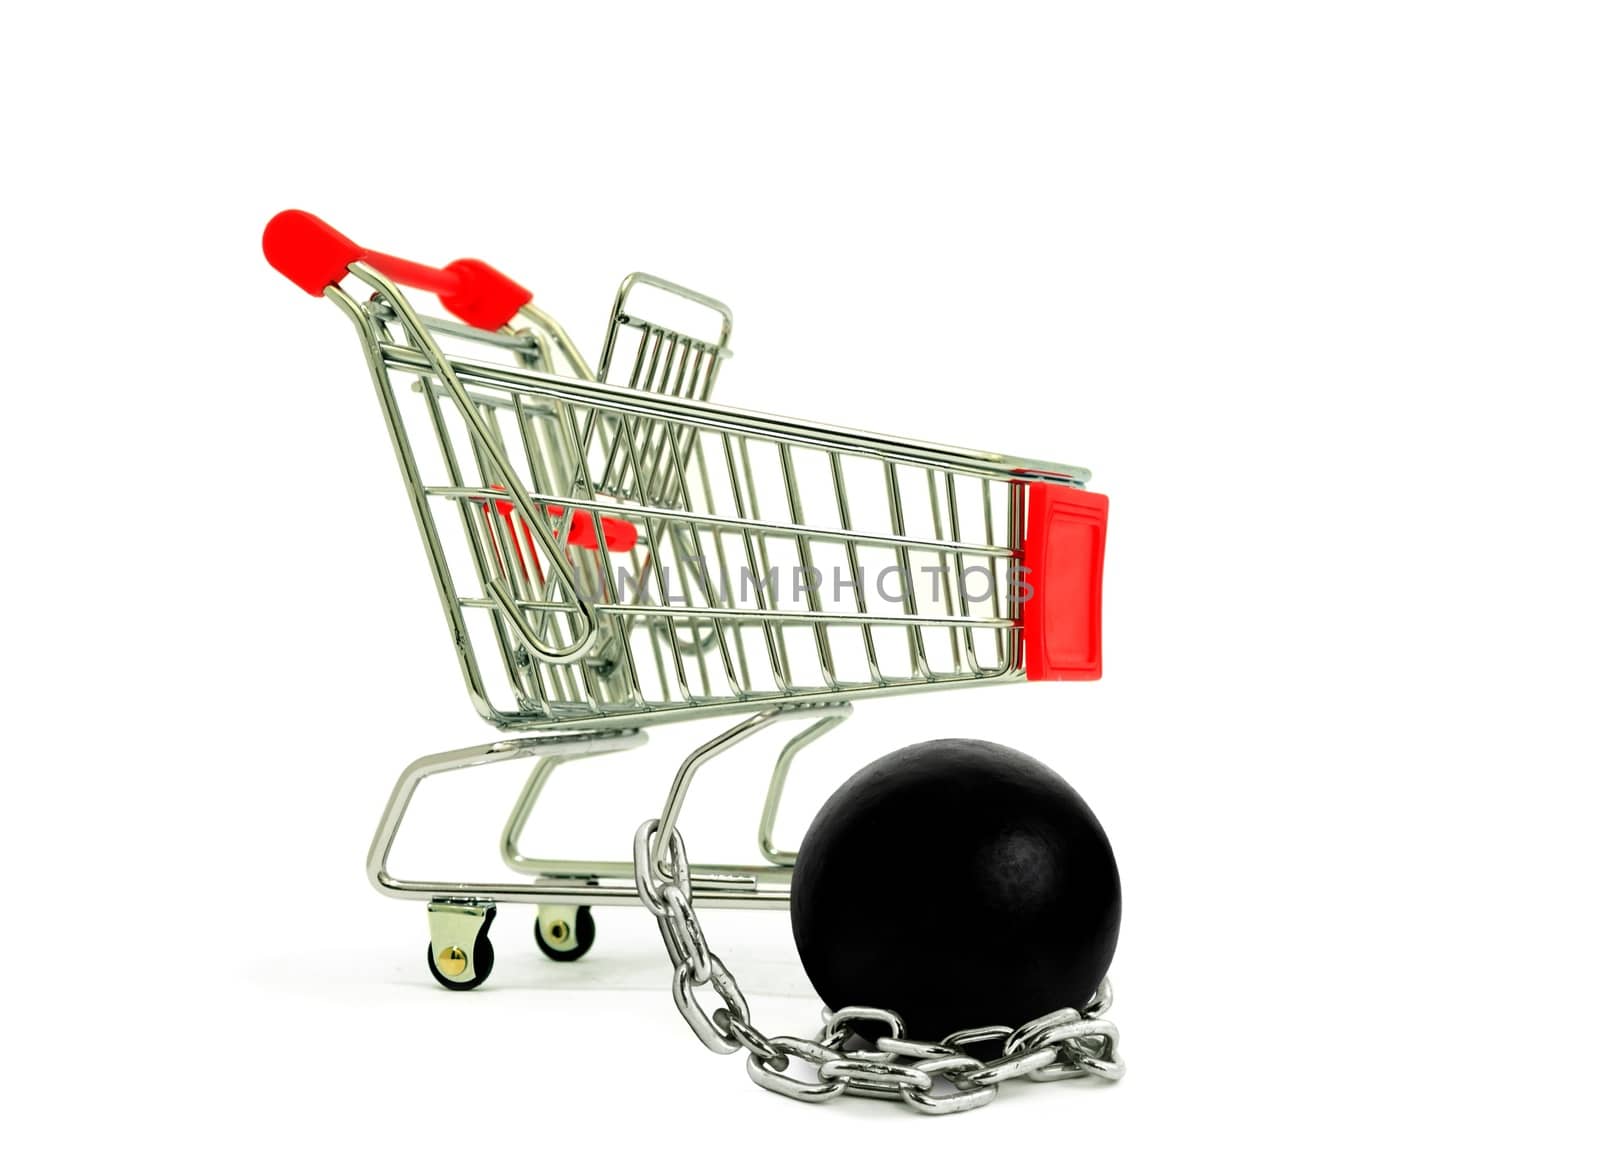 Shopping Cart and Chain Ball by razihusin